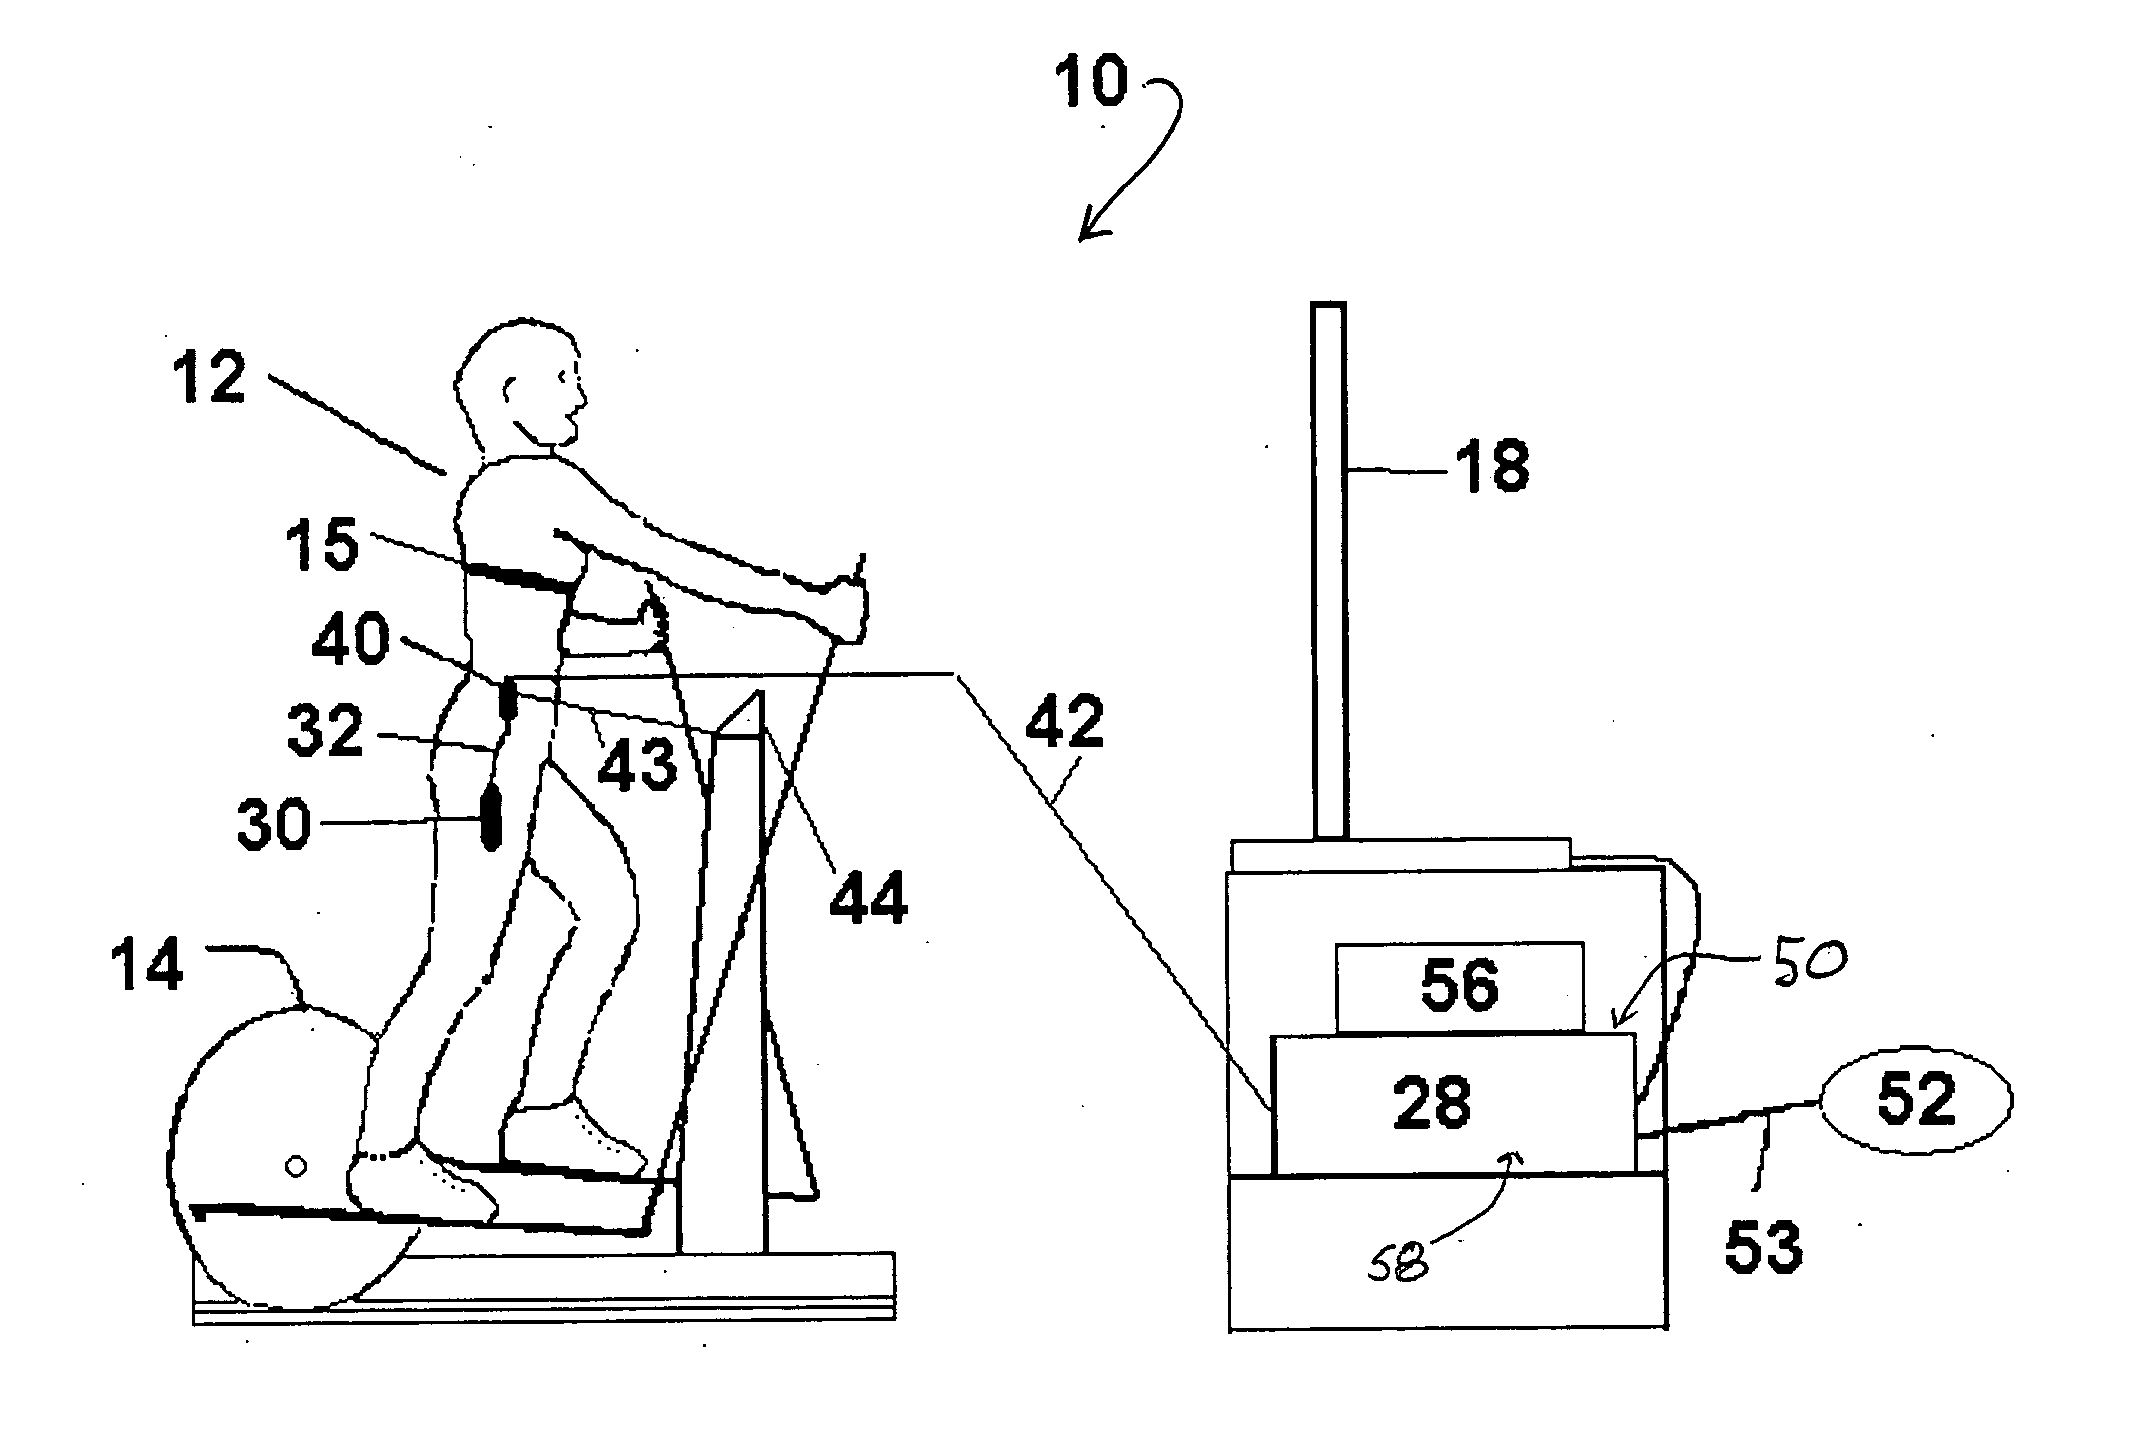 Exercise device independent, variable display rate visual exercise system